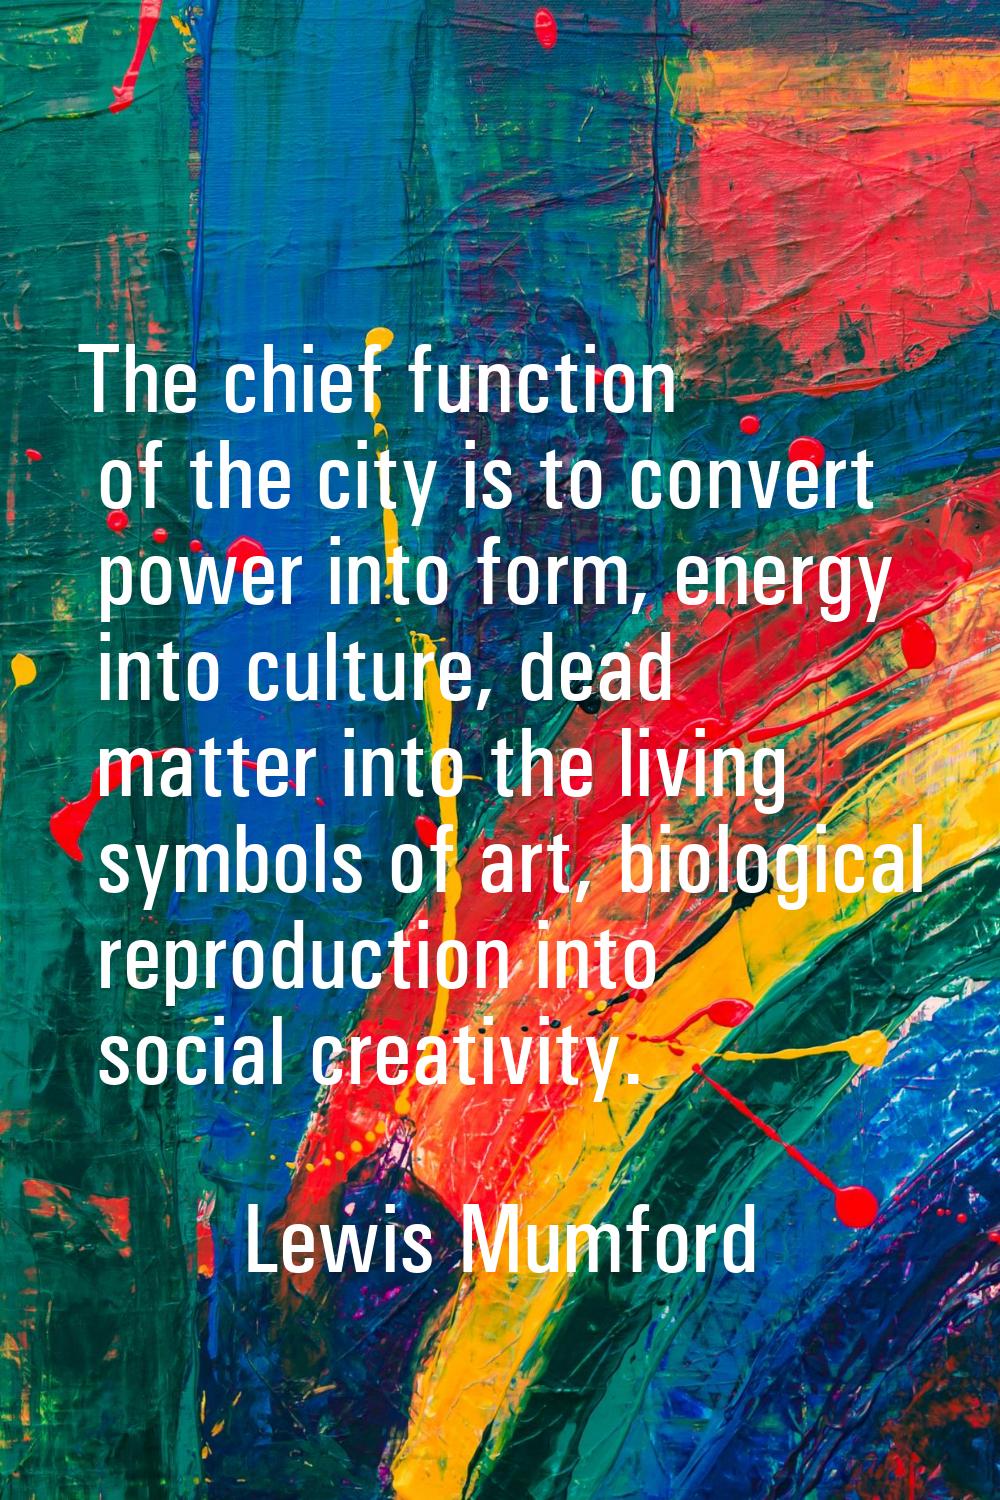 The chief function of the city is to convert power into form, energy into culture, dead matter into